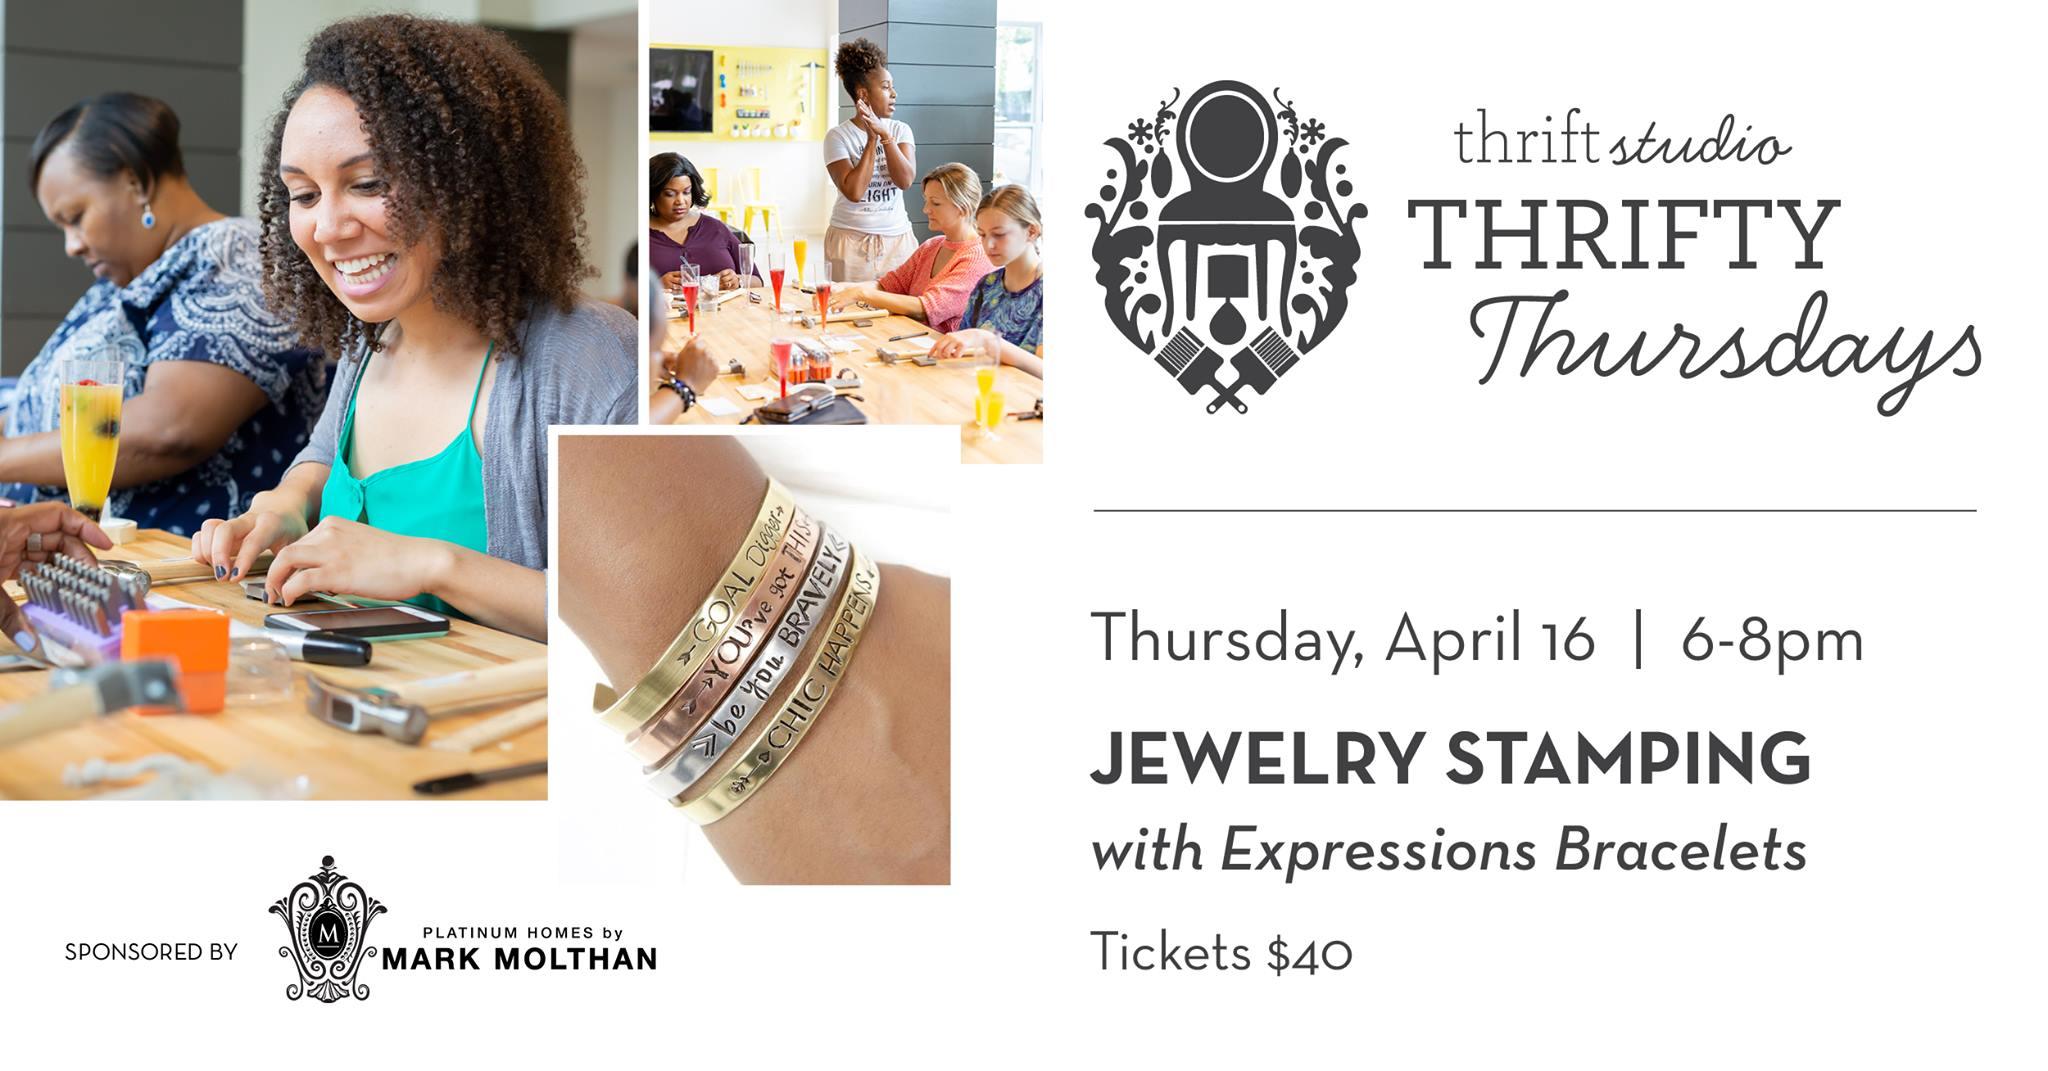 Thrifty Thursday at Thrift Studio: Jewelry Stamping